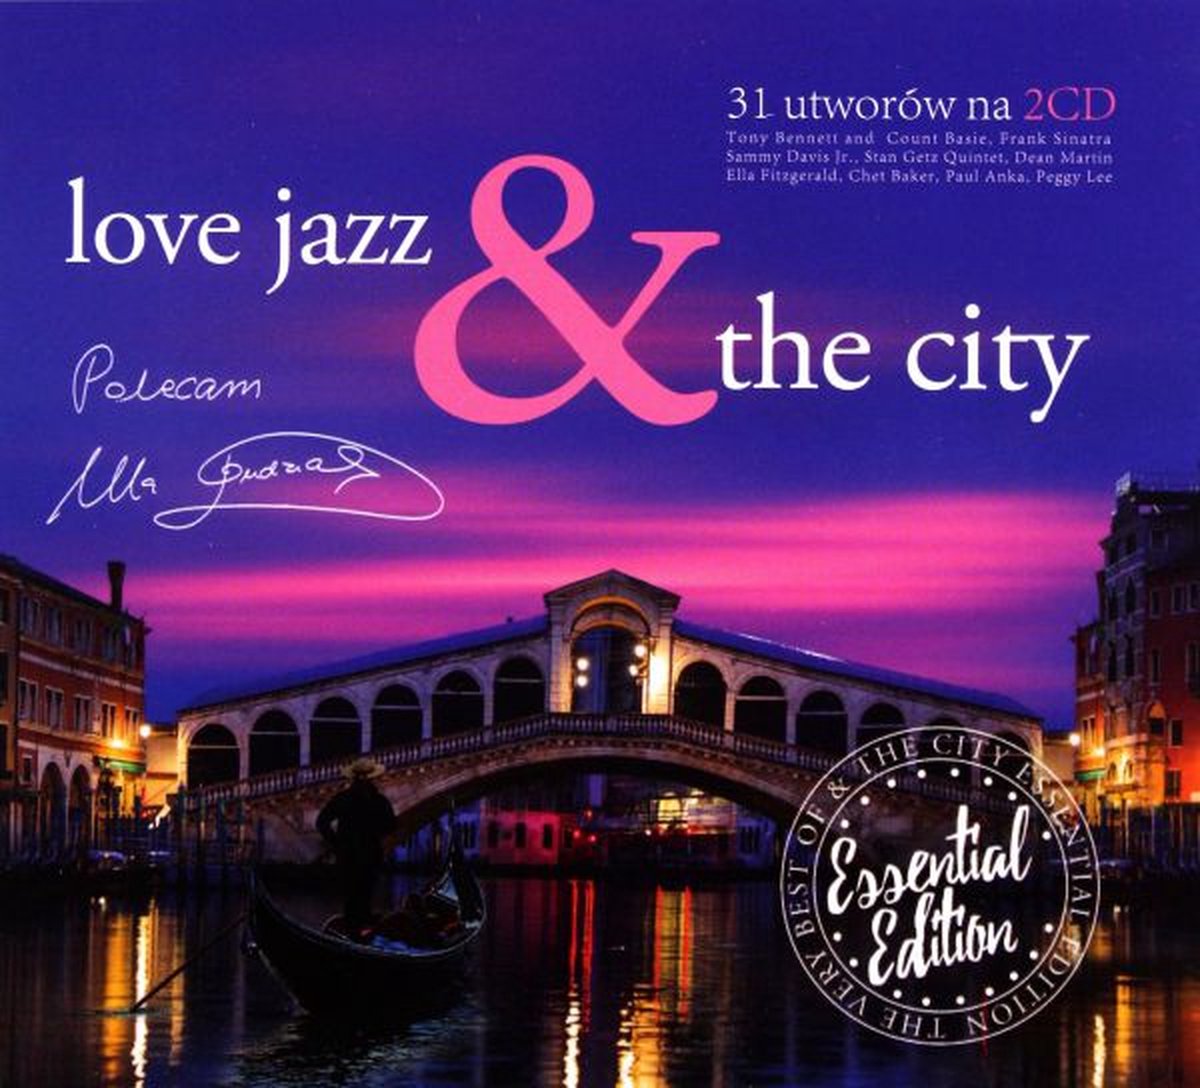 Love Jazz & The City Essential collection [2CD] - Tony Bennett